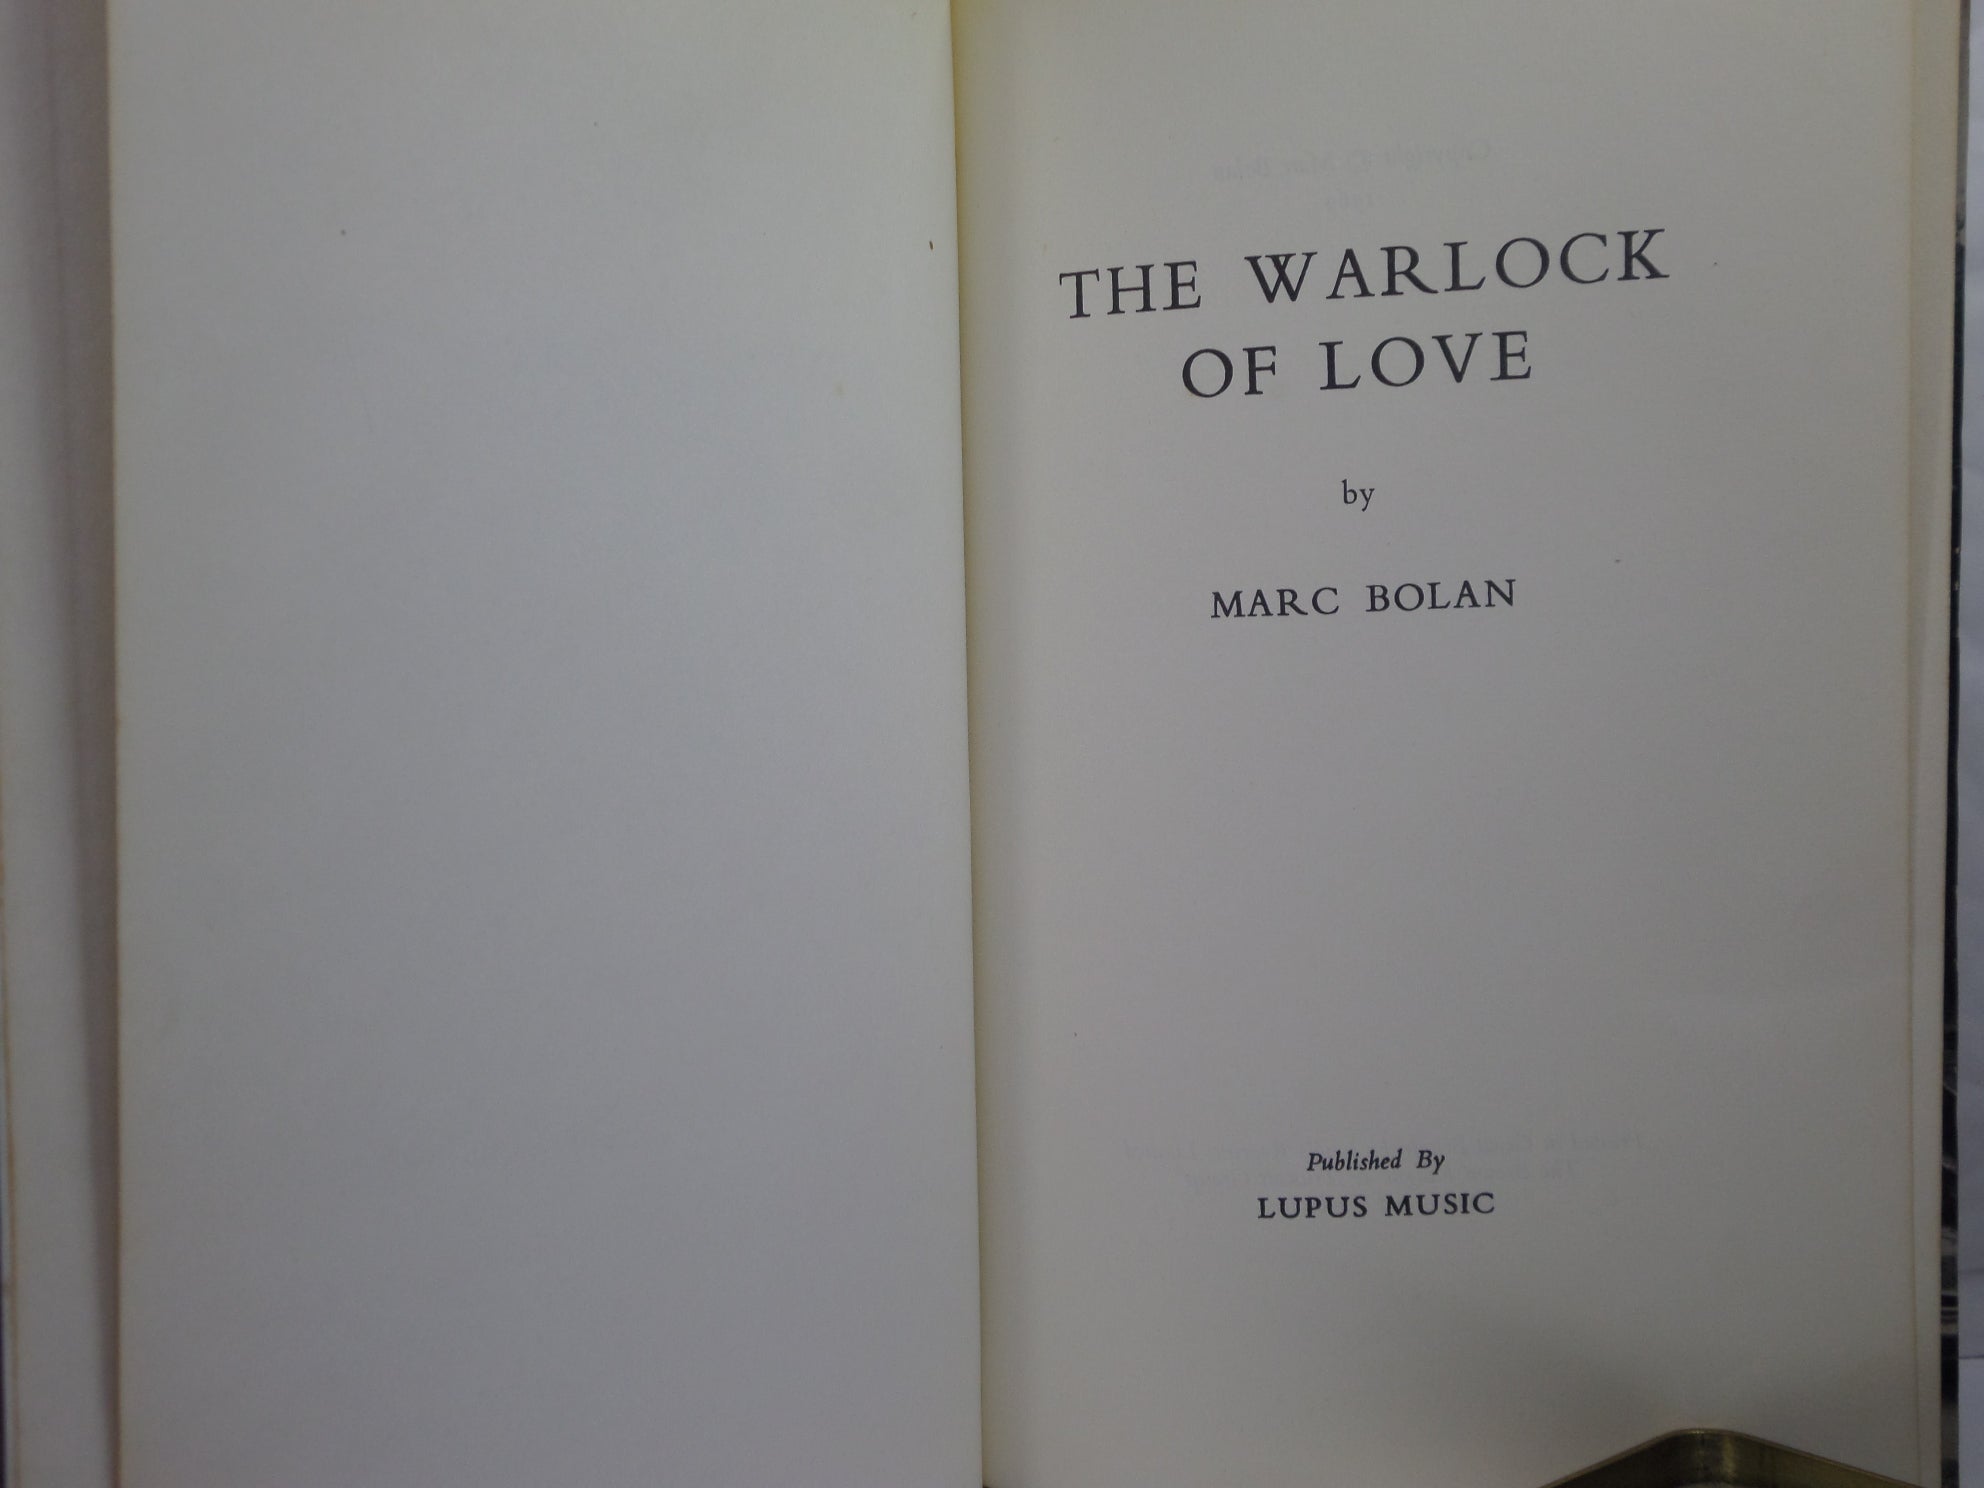 THE WARLOCK OF LOVE BY MARC BOLAN 1969 FIRST EDITION HARDCOVER